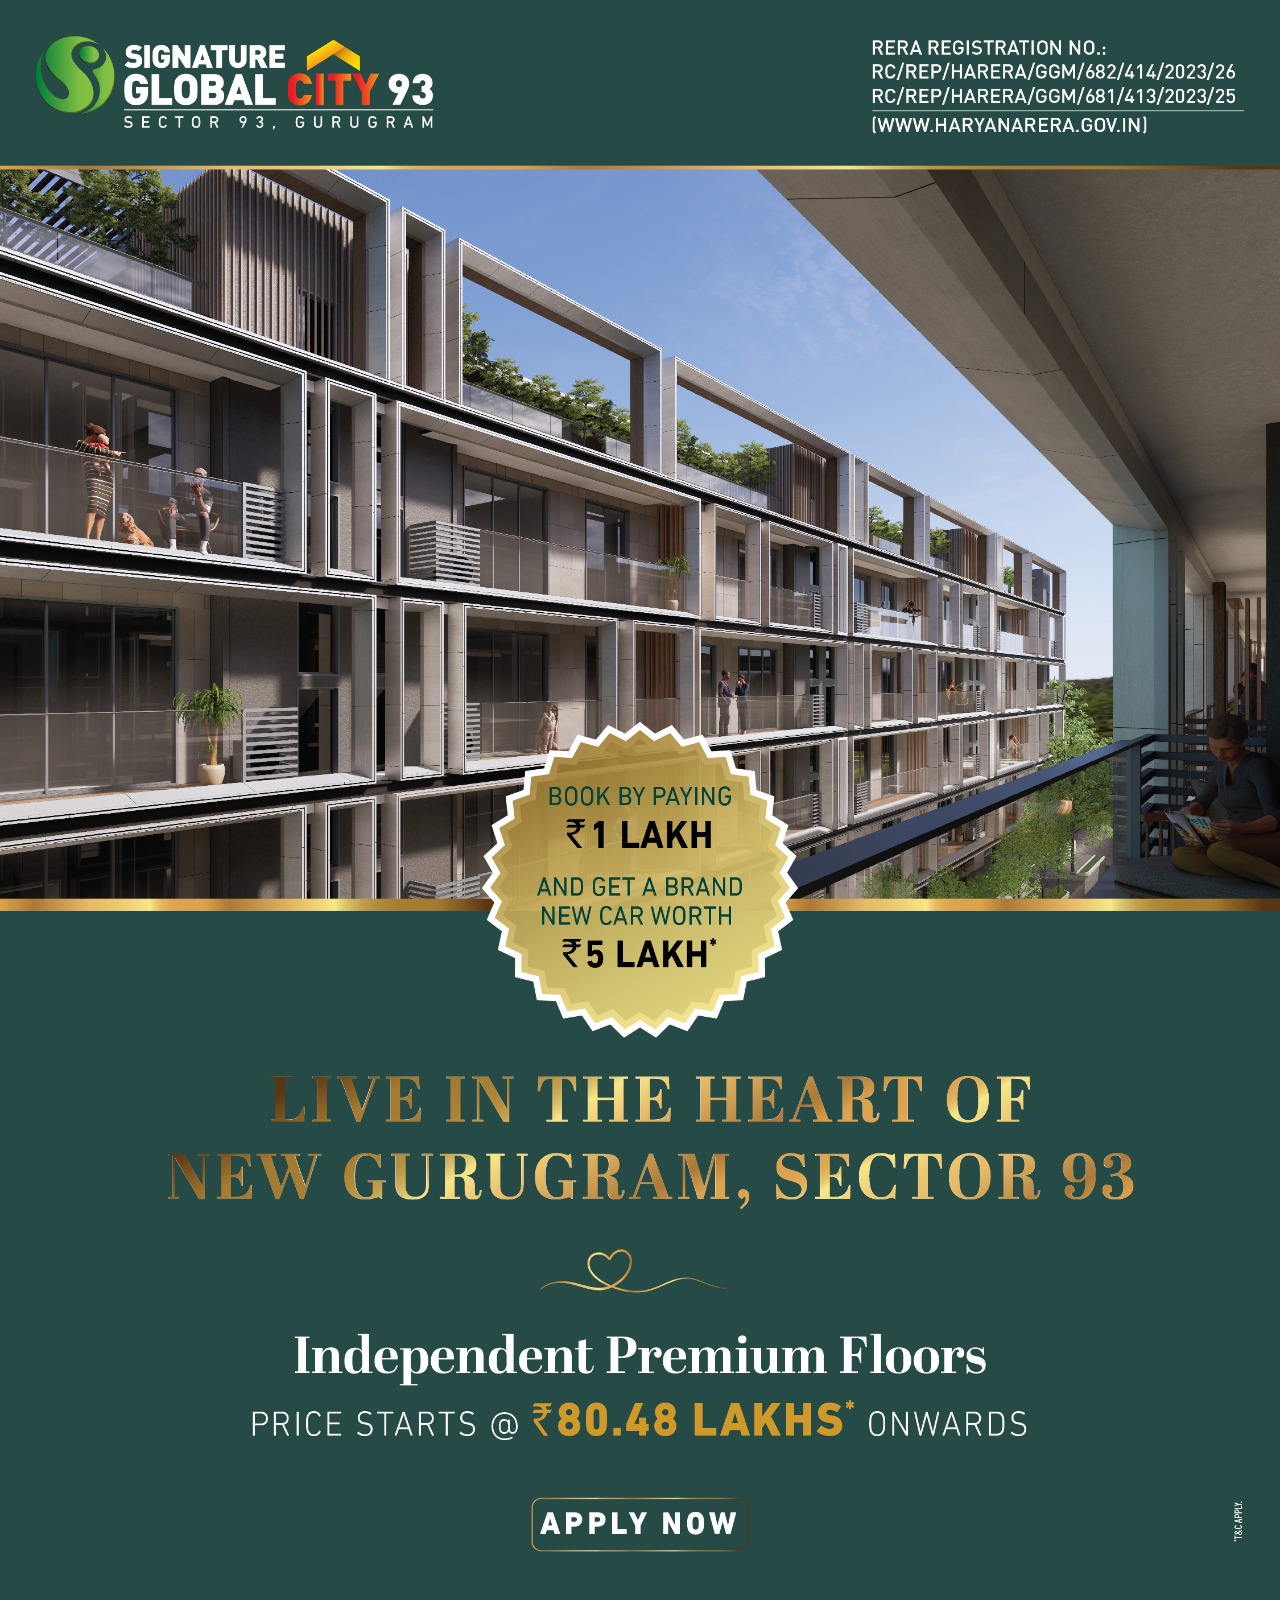 Perfect home and perfect location at Signature Global City 93, Gurgaon Update